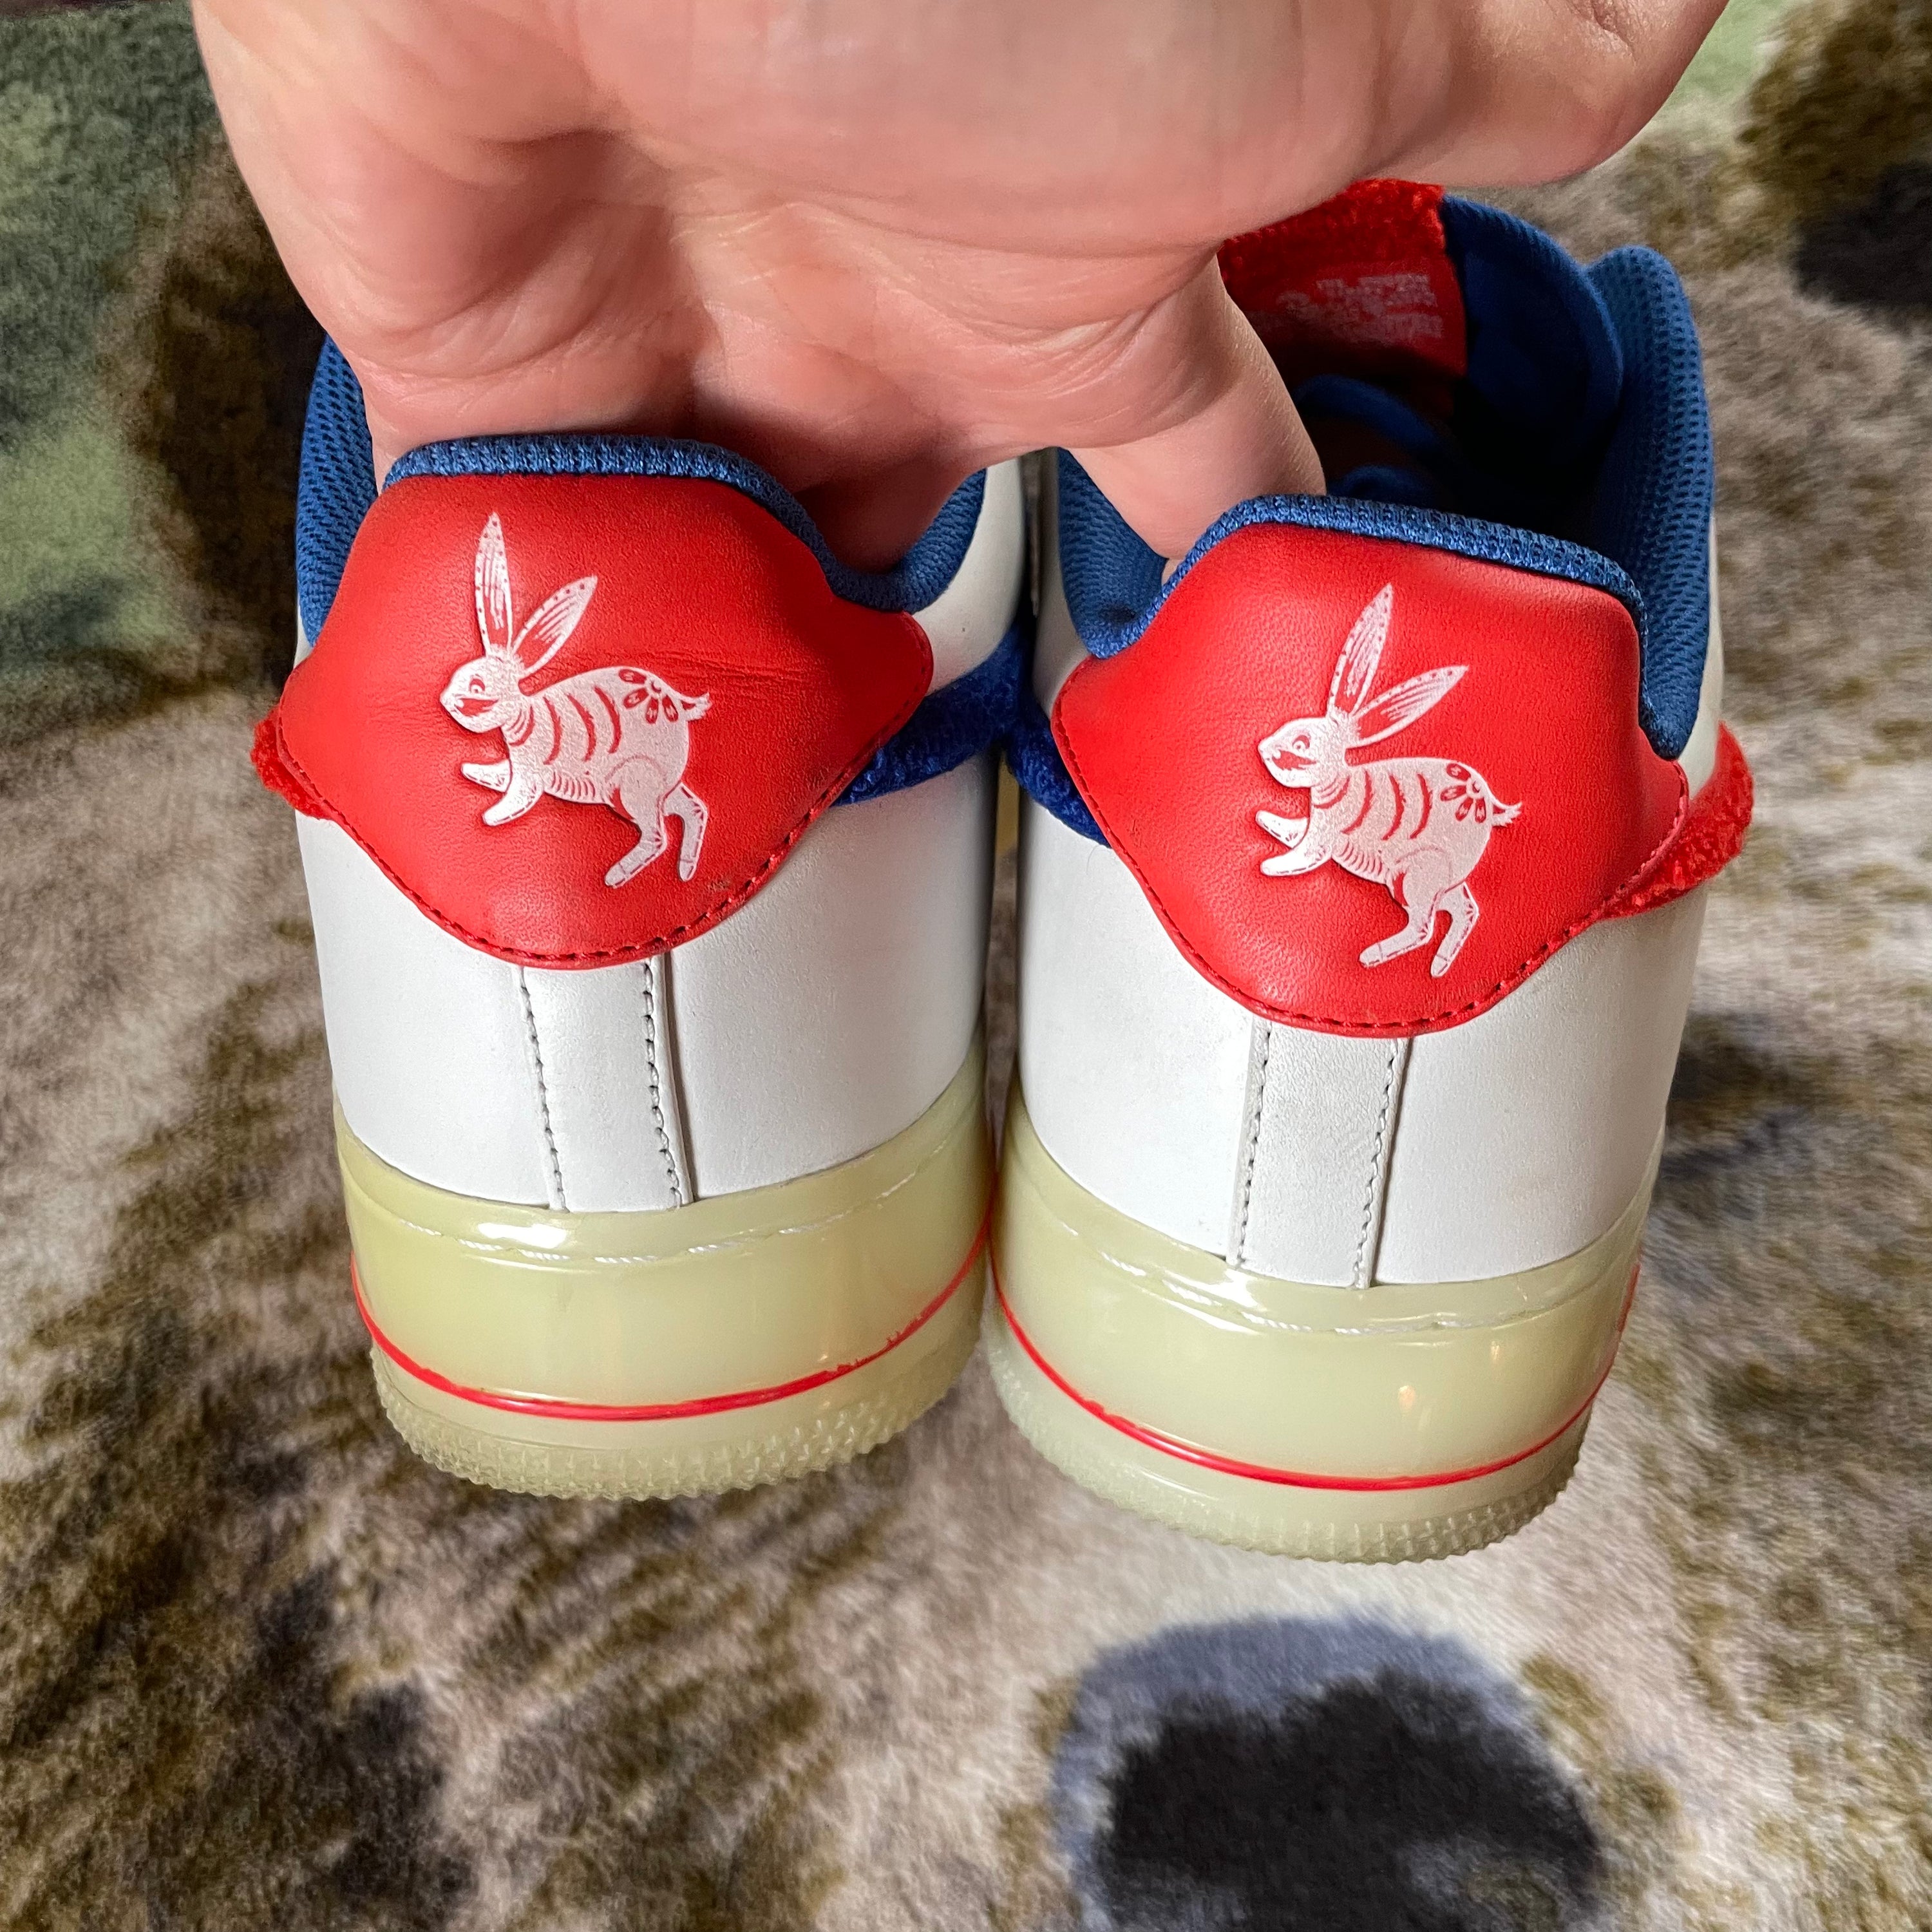 US 13 - NIKE AIR FORCE 1 LOW SUPREME "YEAR OF THE RABBIT" [2010]